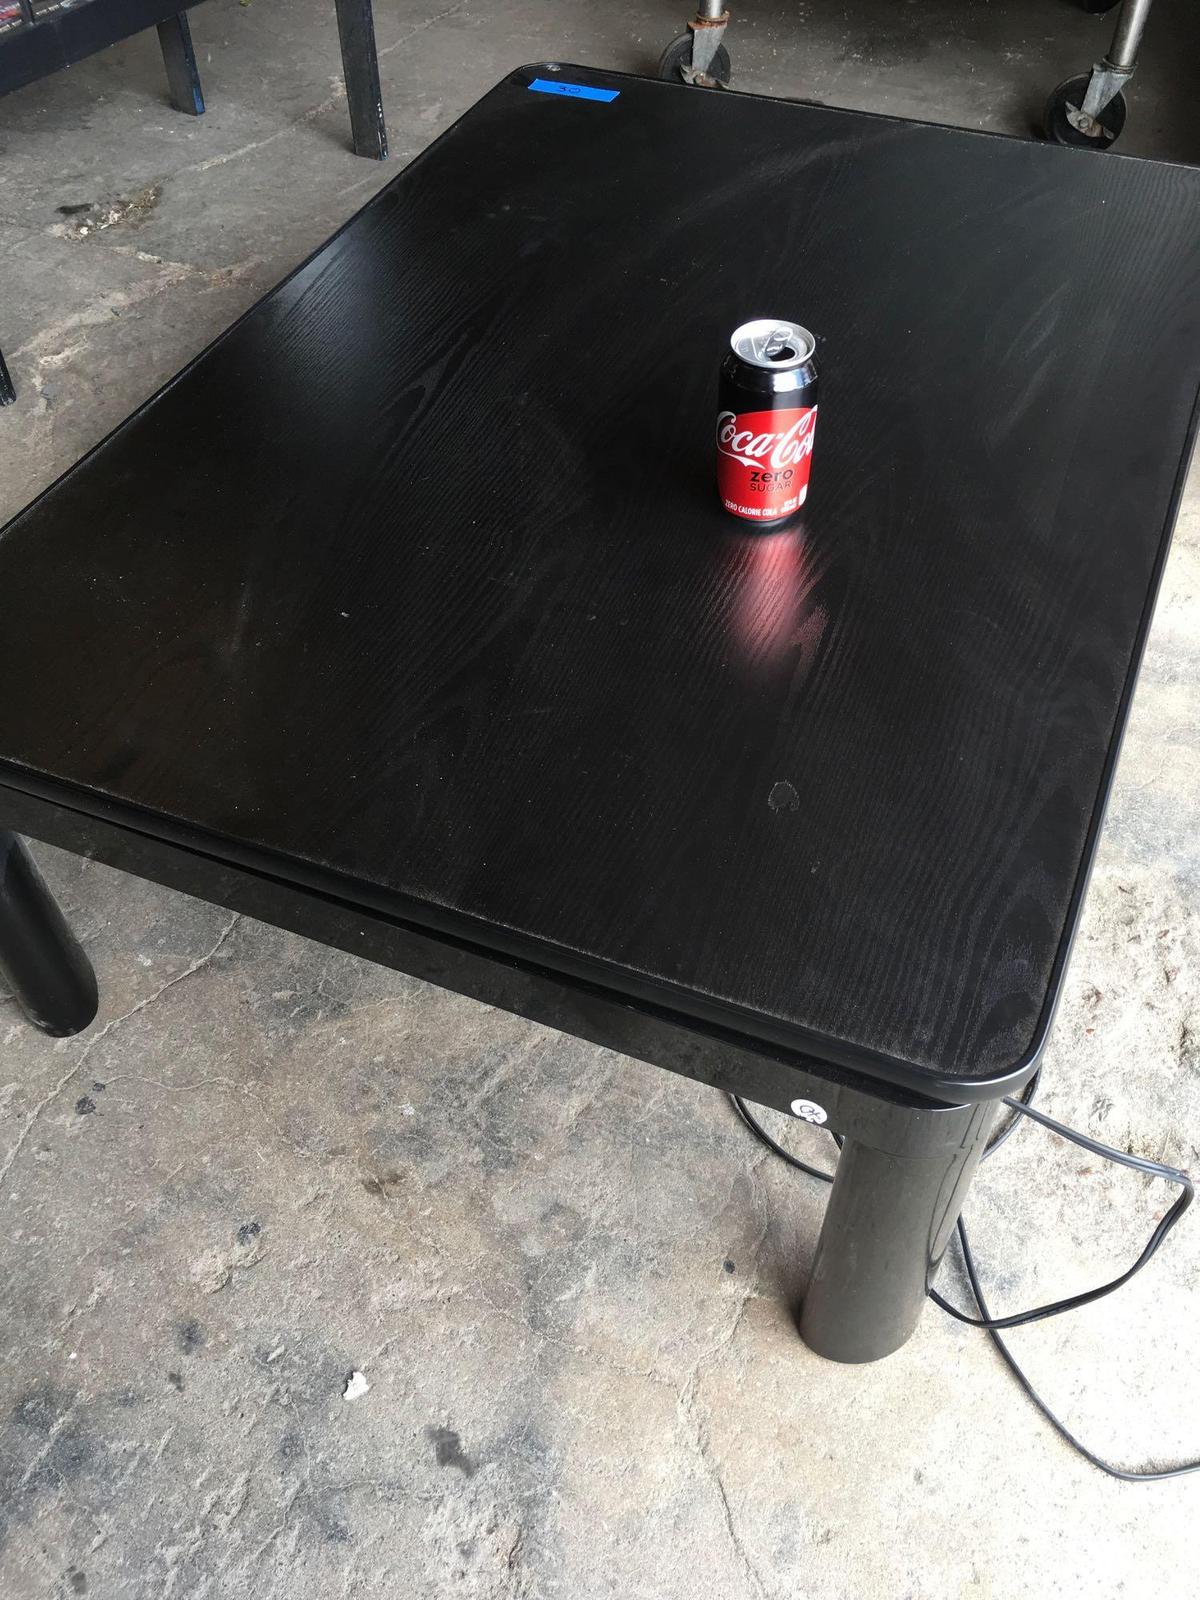 41" x 29" Sungold heated table